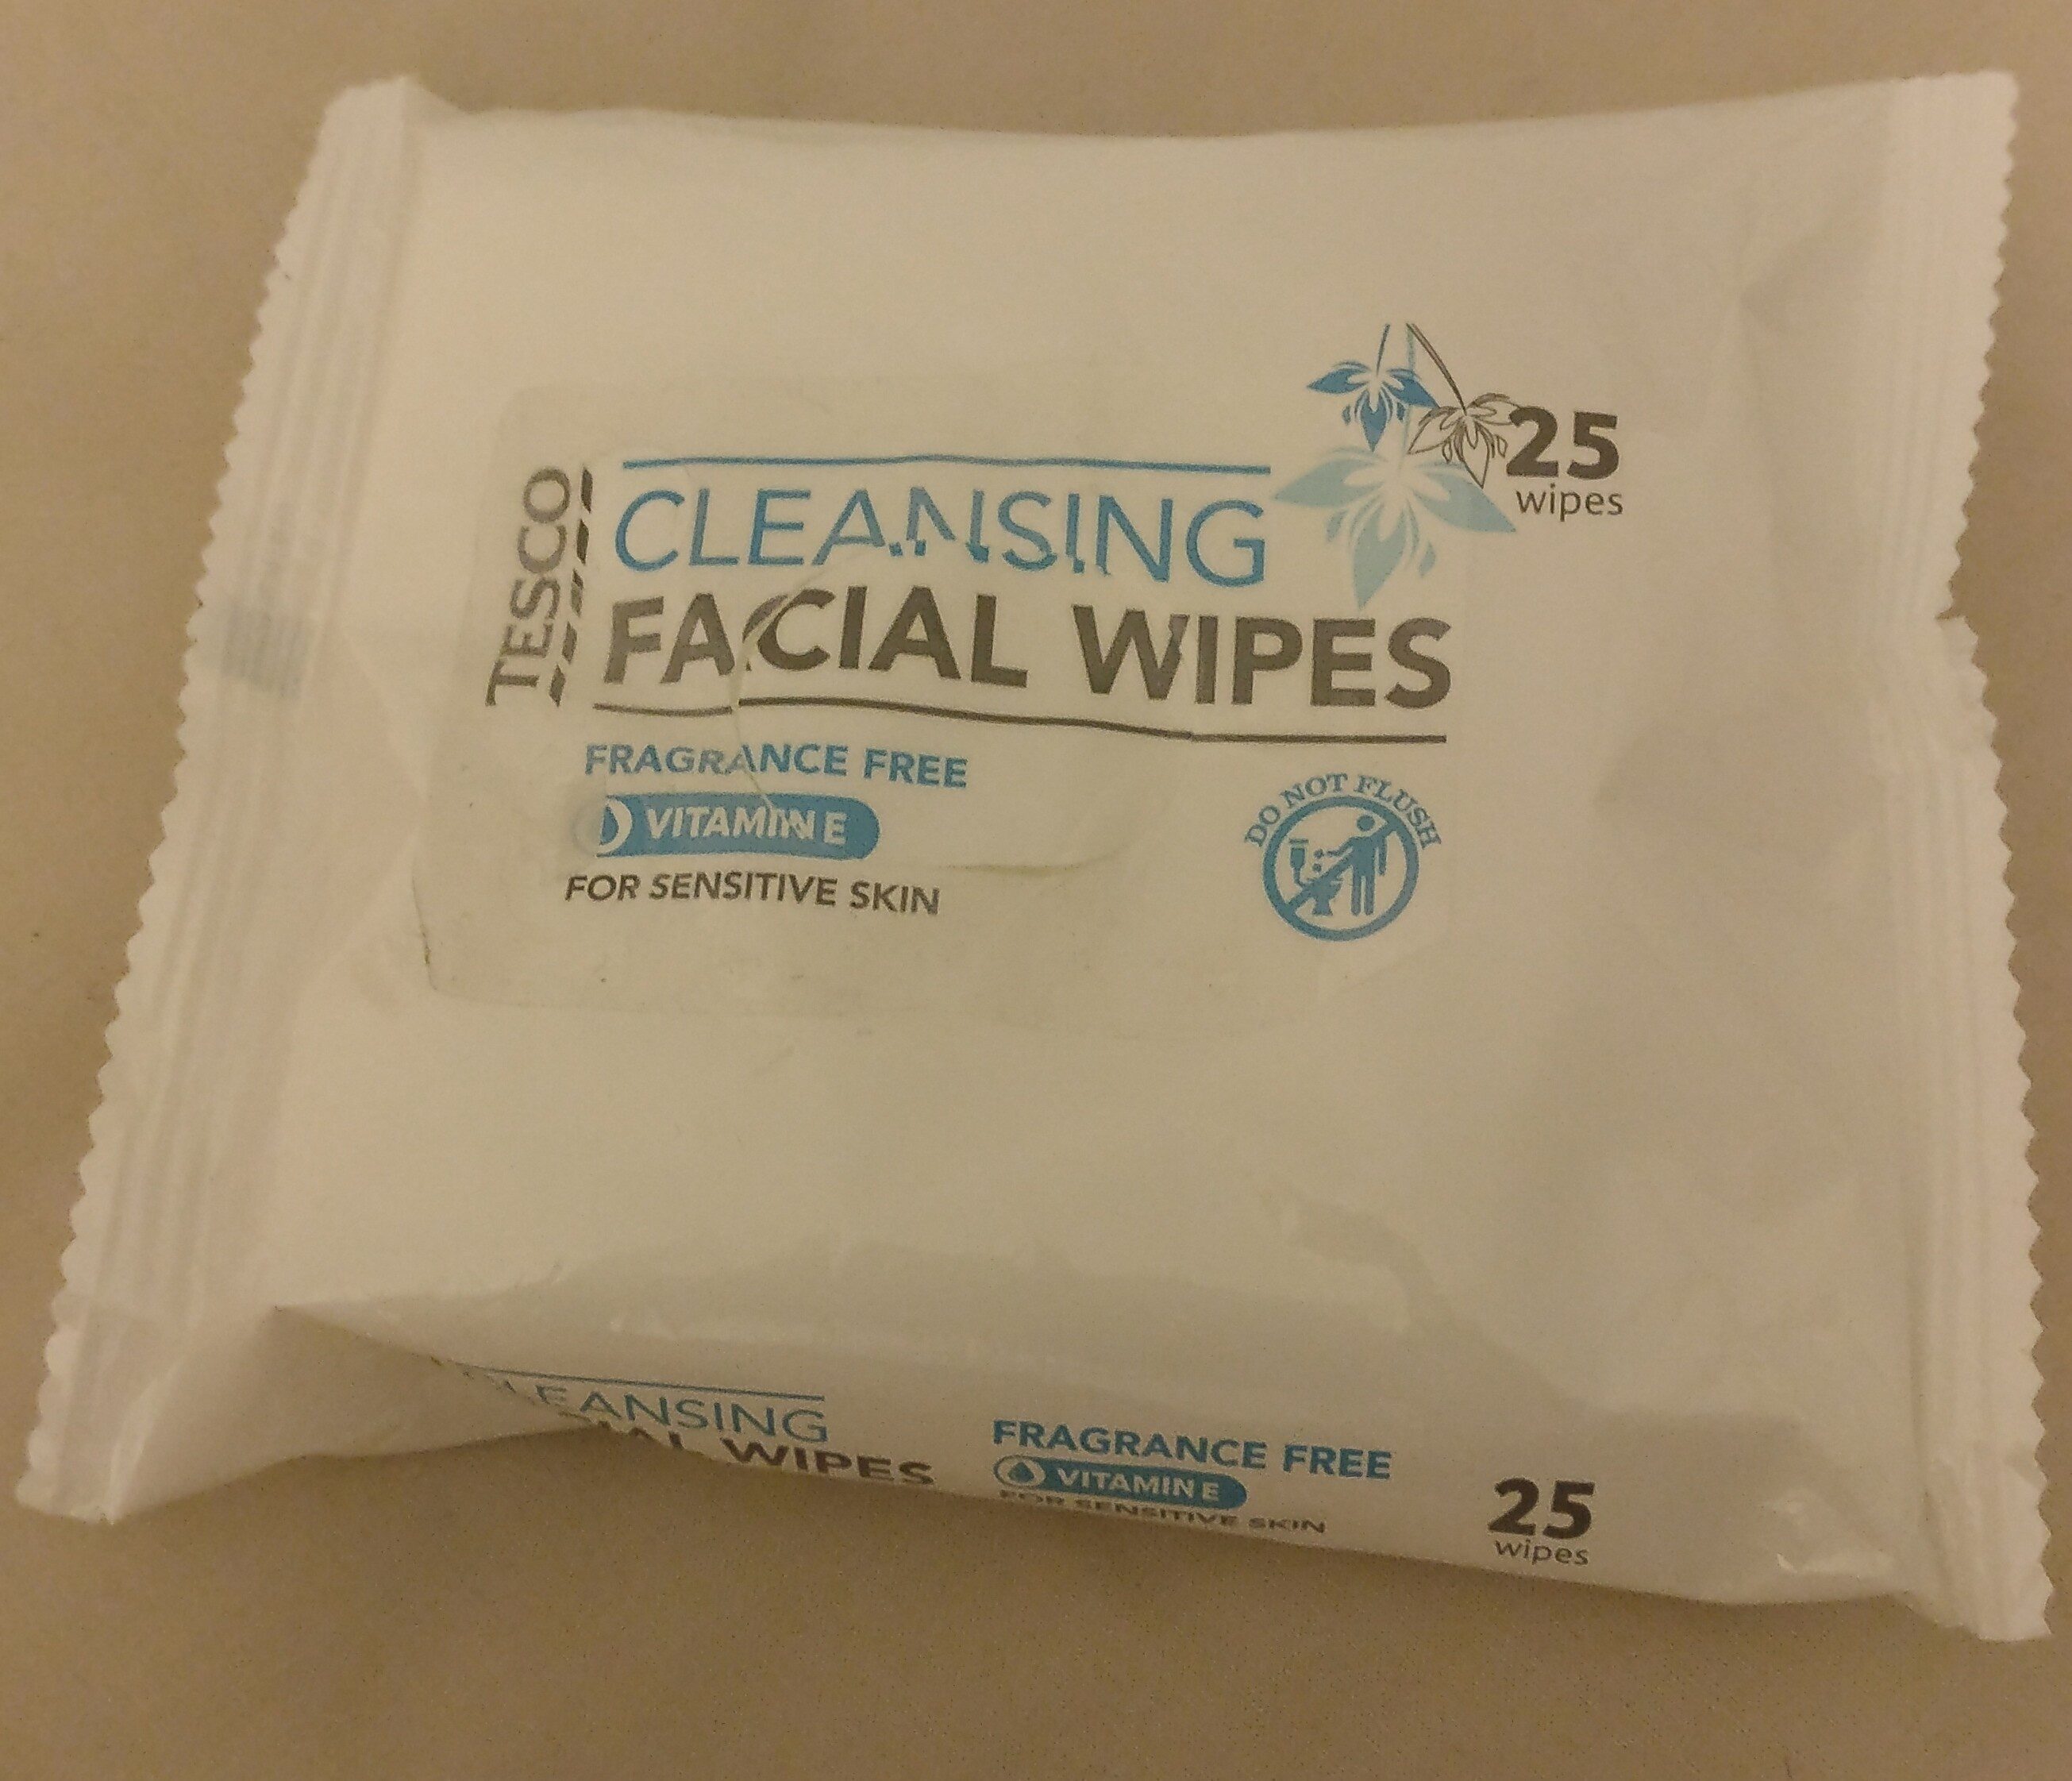 Cleansing facial wipes - Product - en